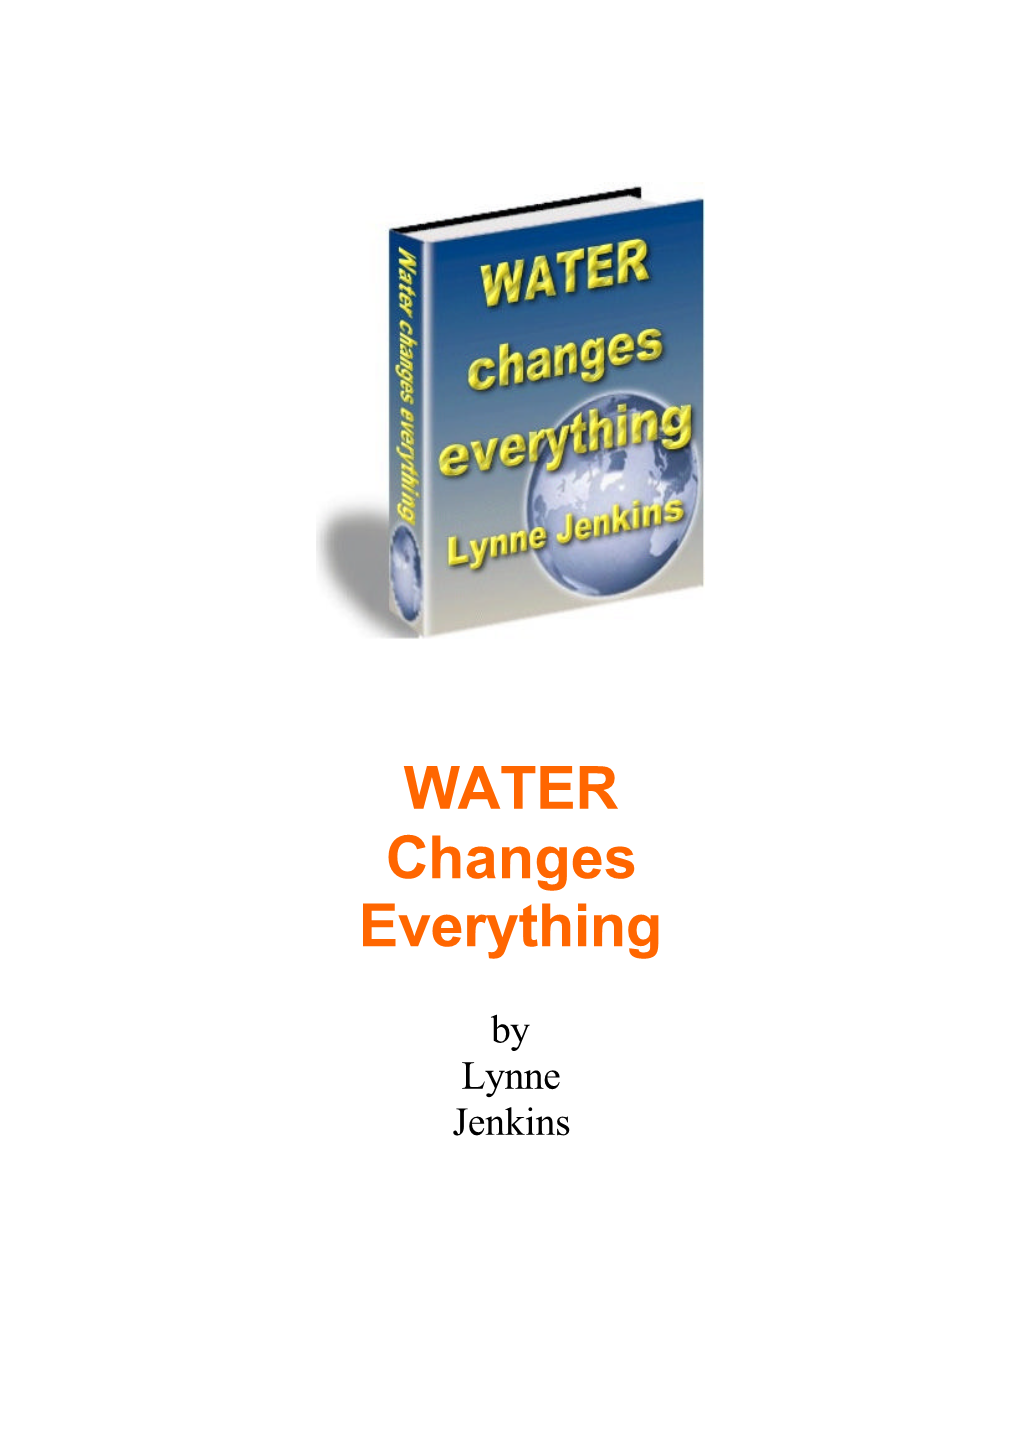 WATER Changes Everything